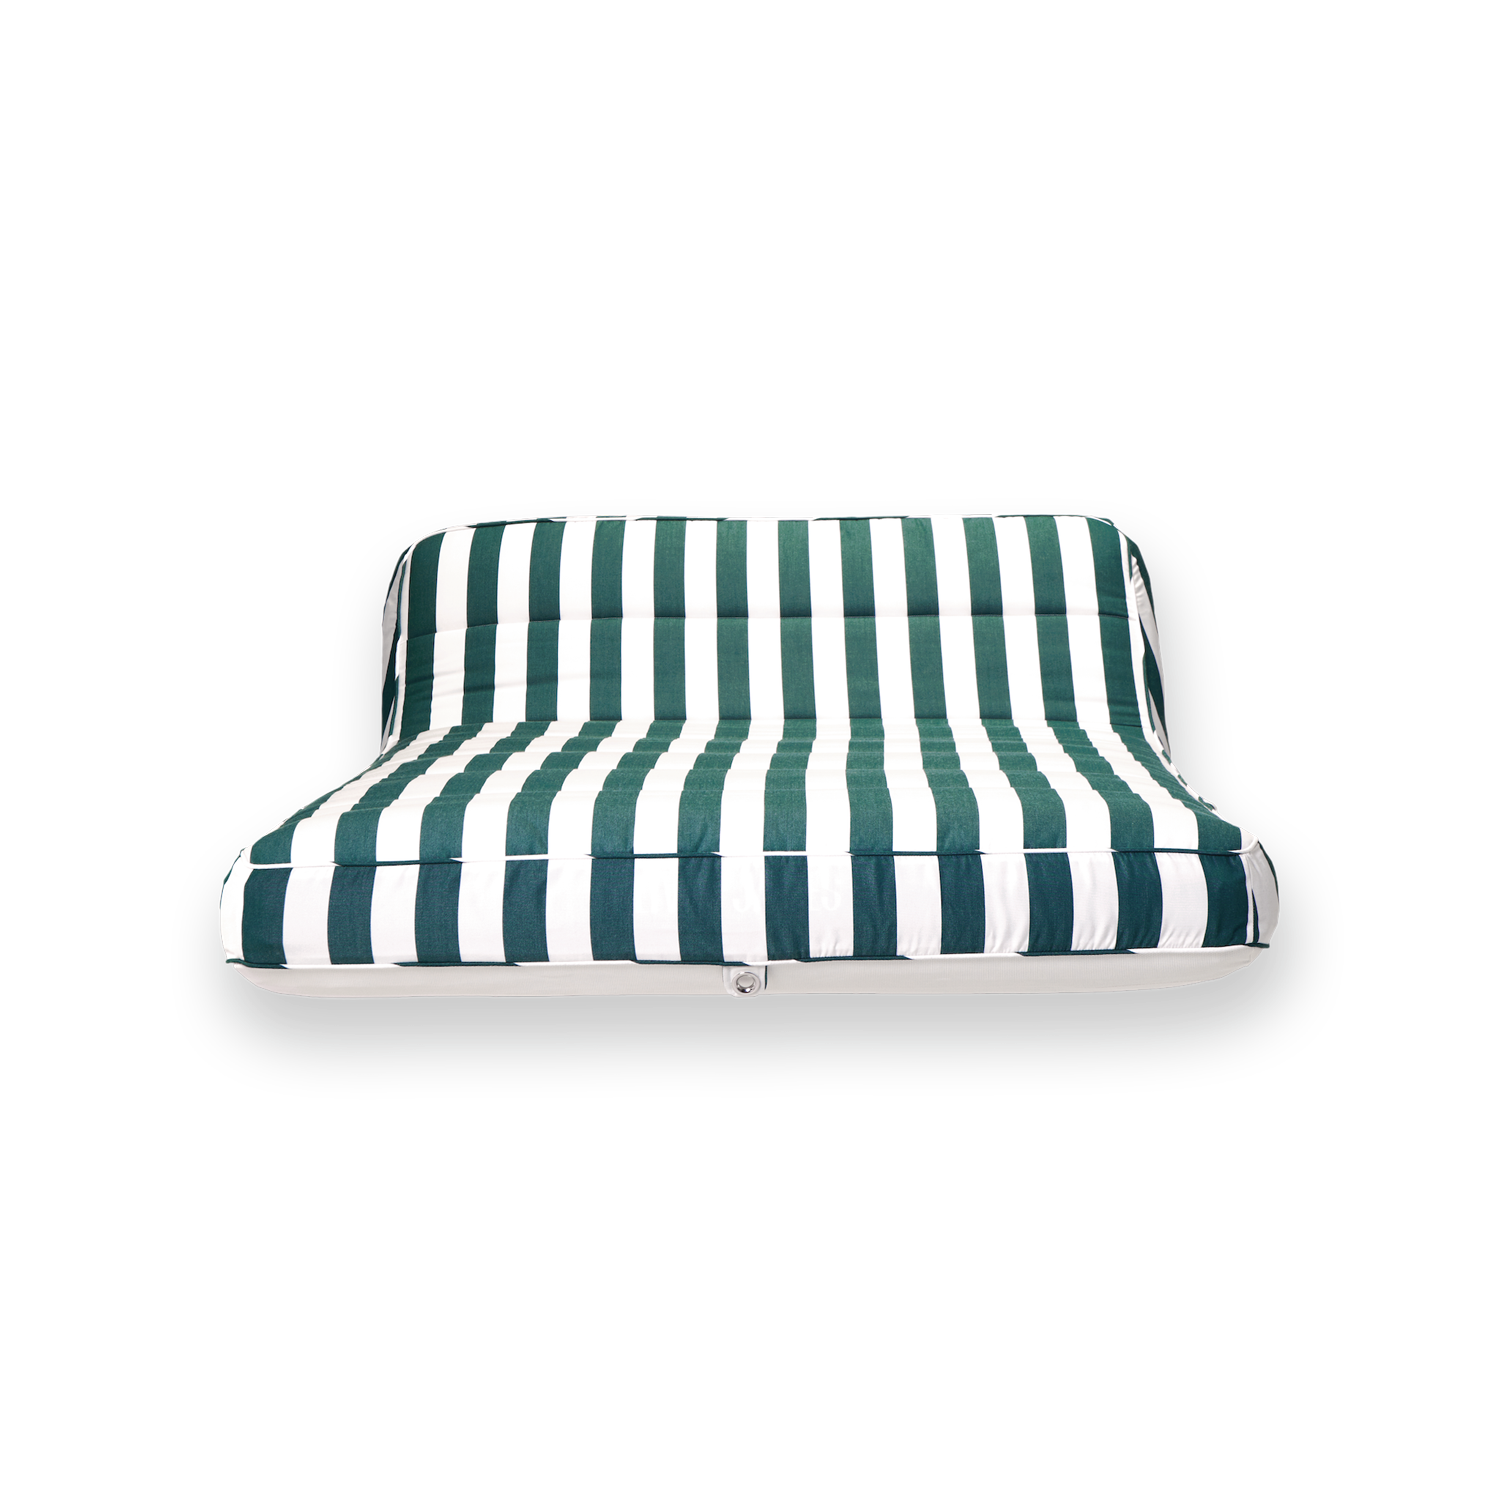 The front profile of a double green and white striped luxury pool float.